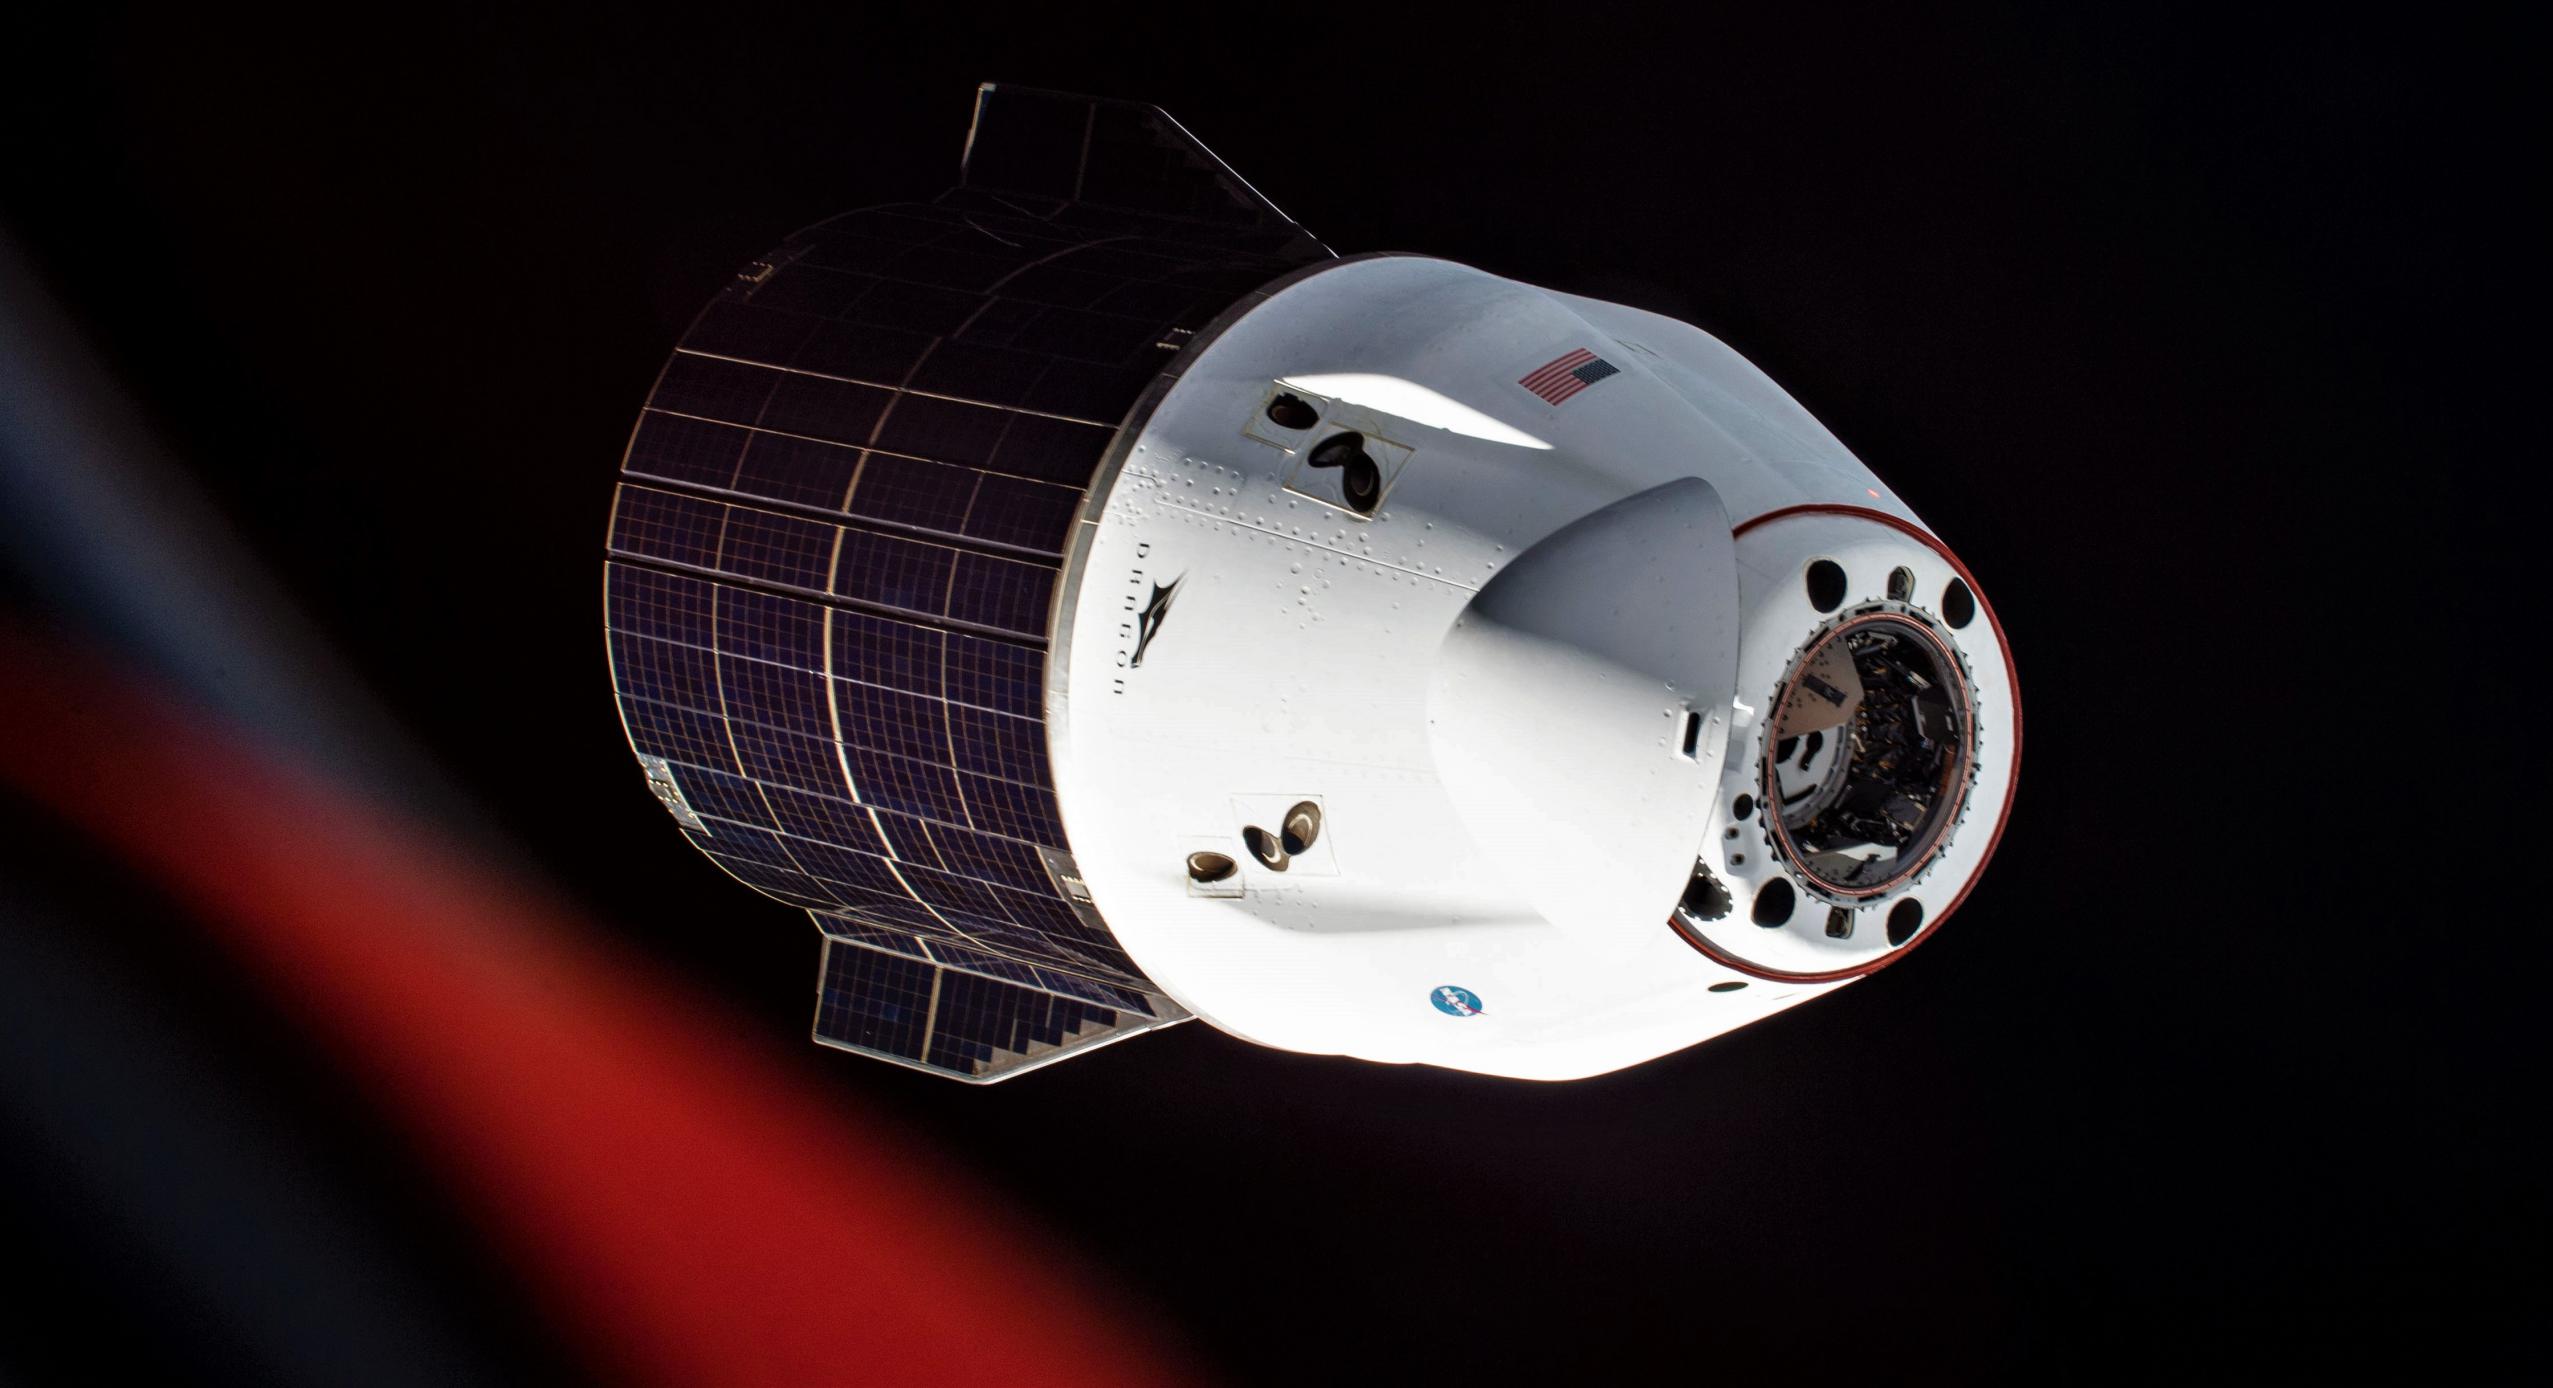 SpaceX Cargo Dragon returns from International Space Station after 36-day stay